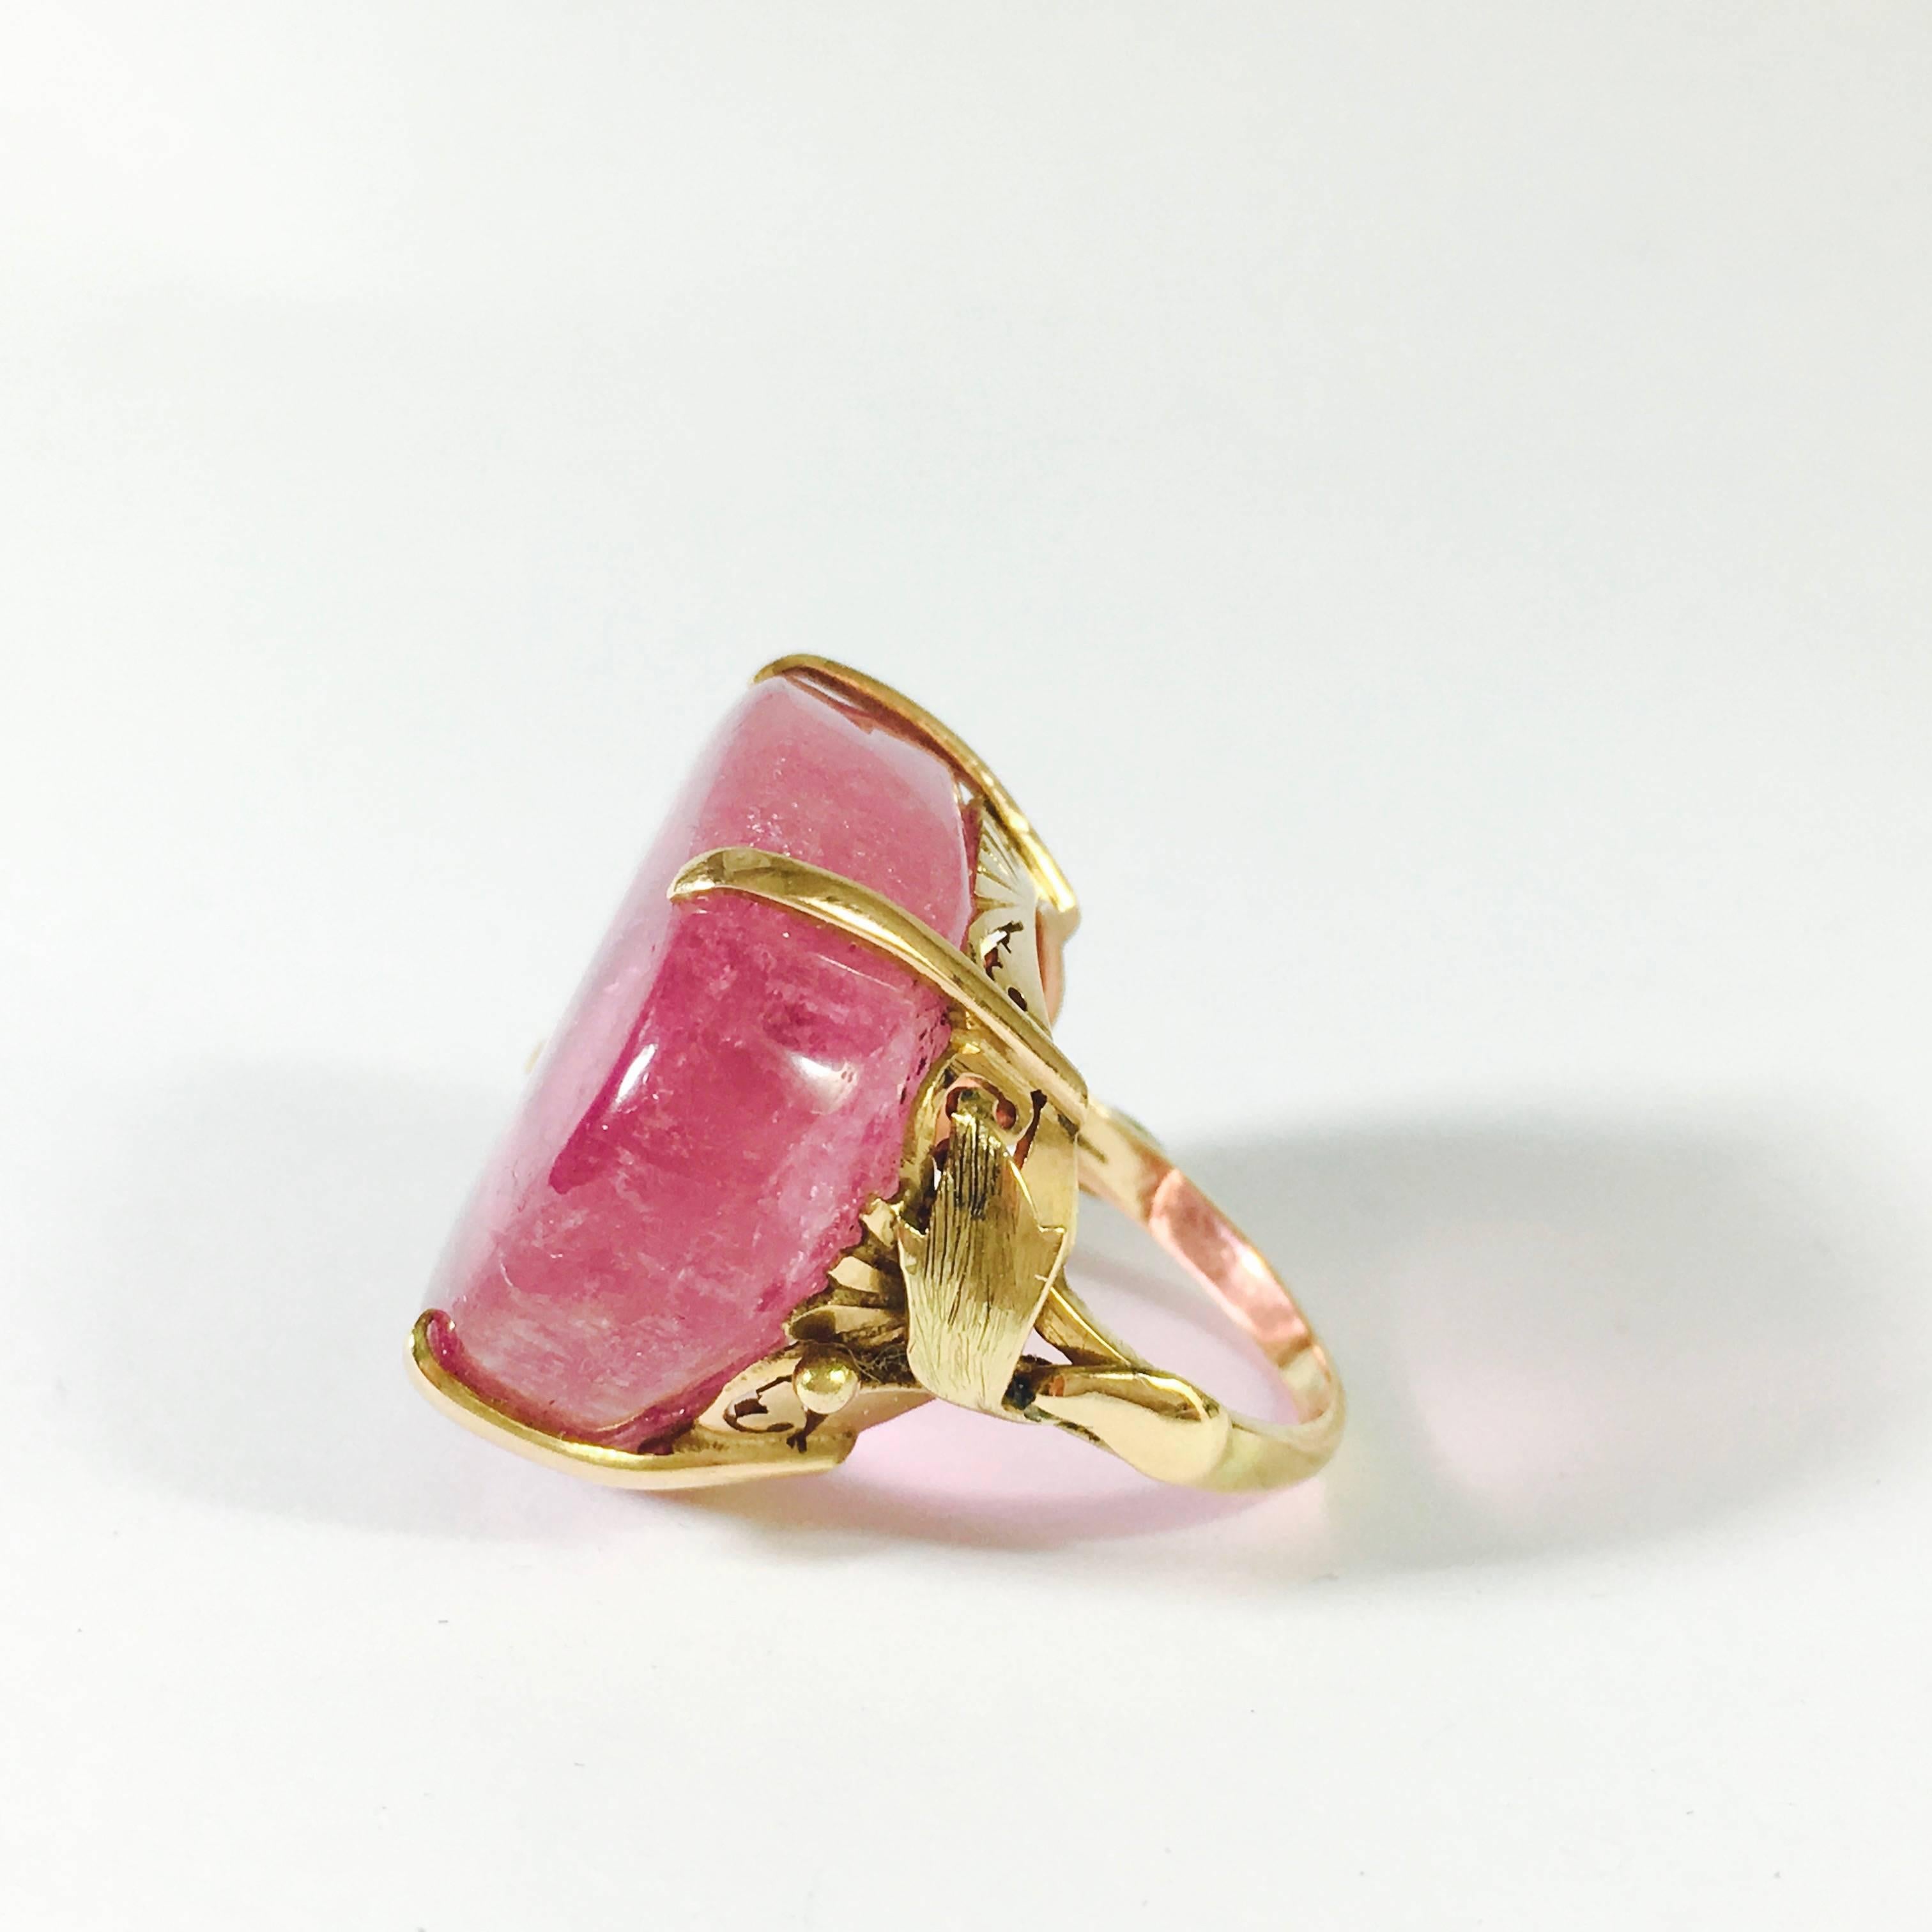 Fantastic Chinese pink tourmaline cabochon solitaire set in a vintage 14K gold setting. The stone measures 26.5 x 22.2 x 7.3 mm, approximate weight of 
35 carats. 
Weight: 14.8 grams 
Size: 4.5 